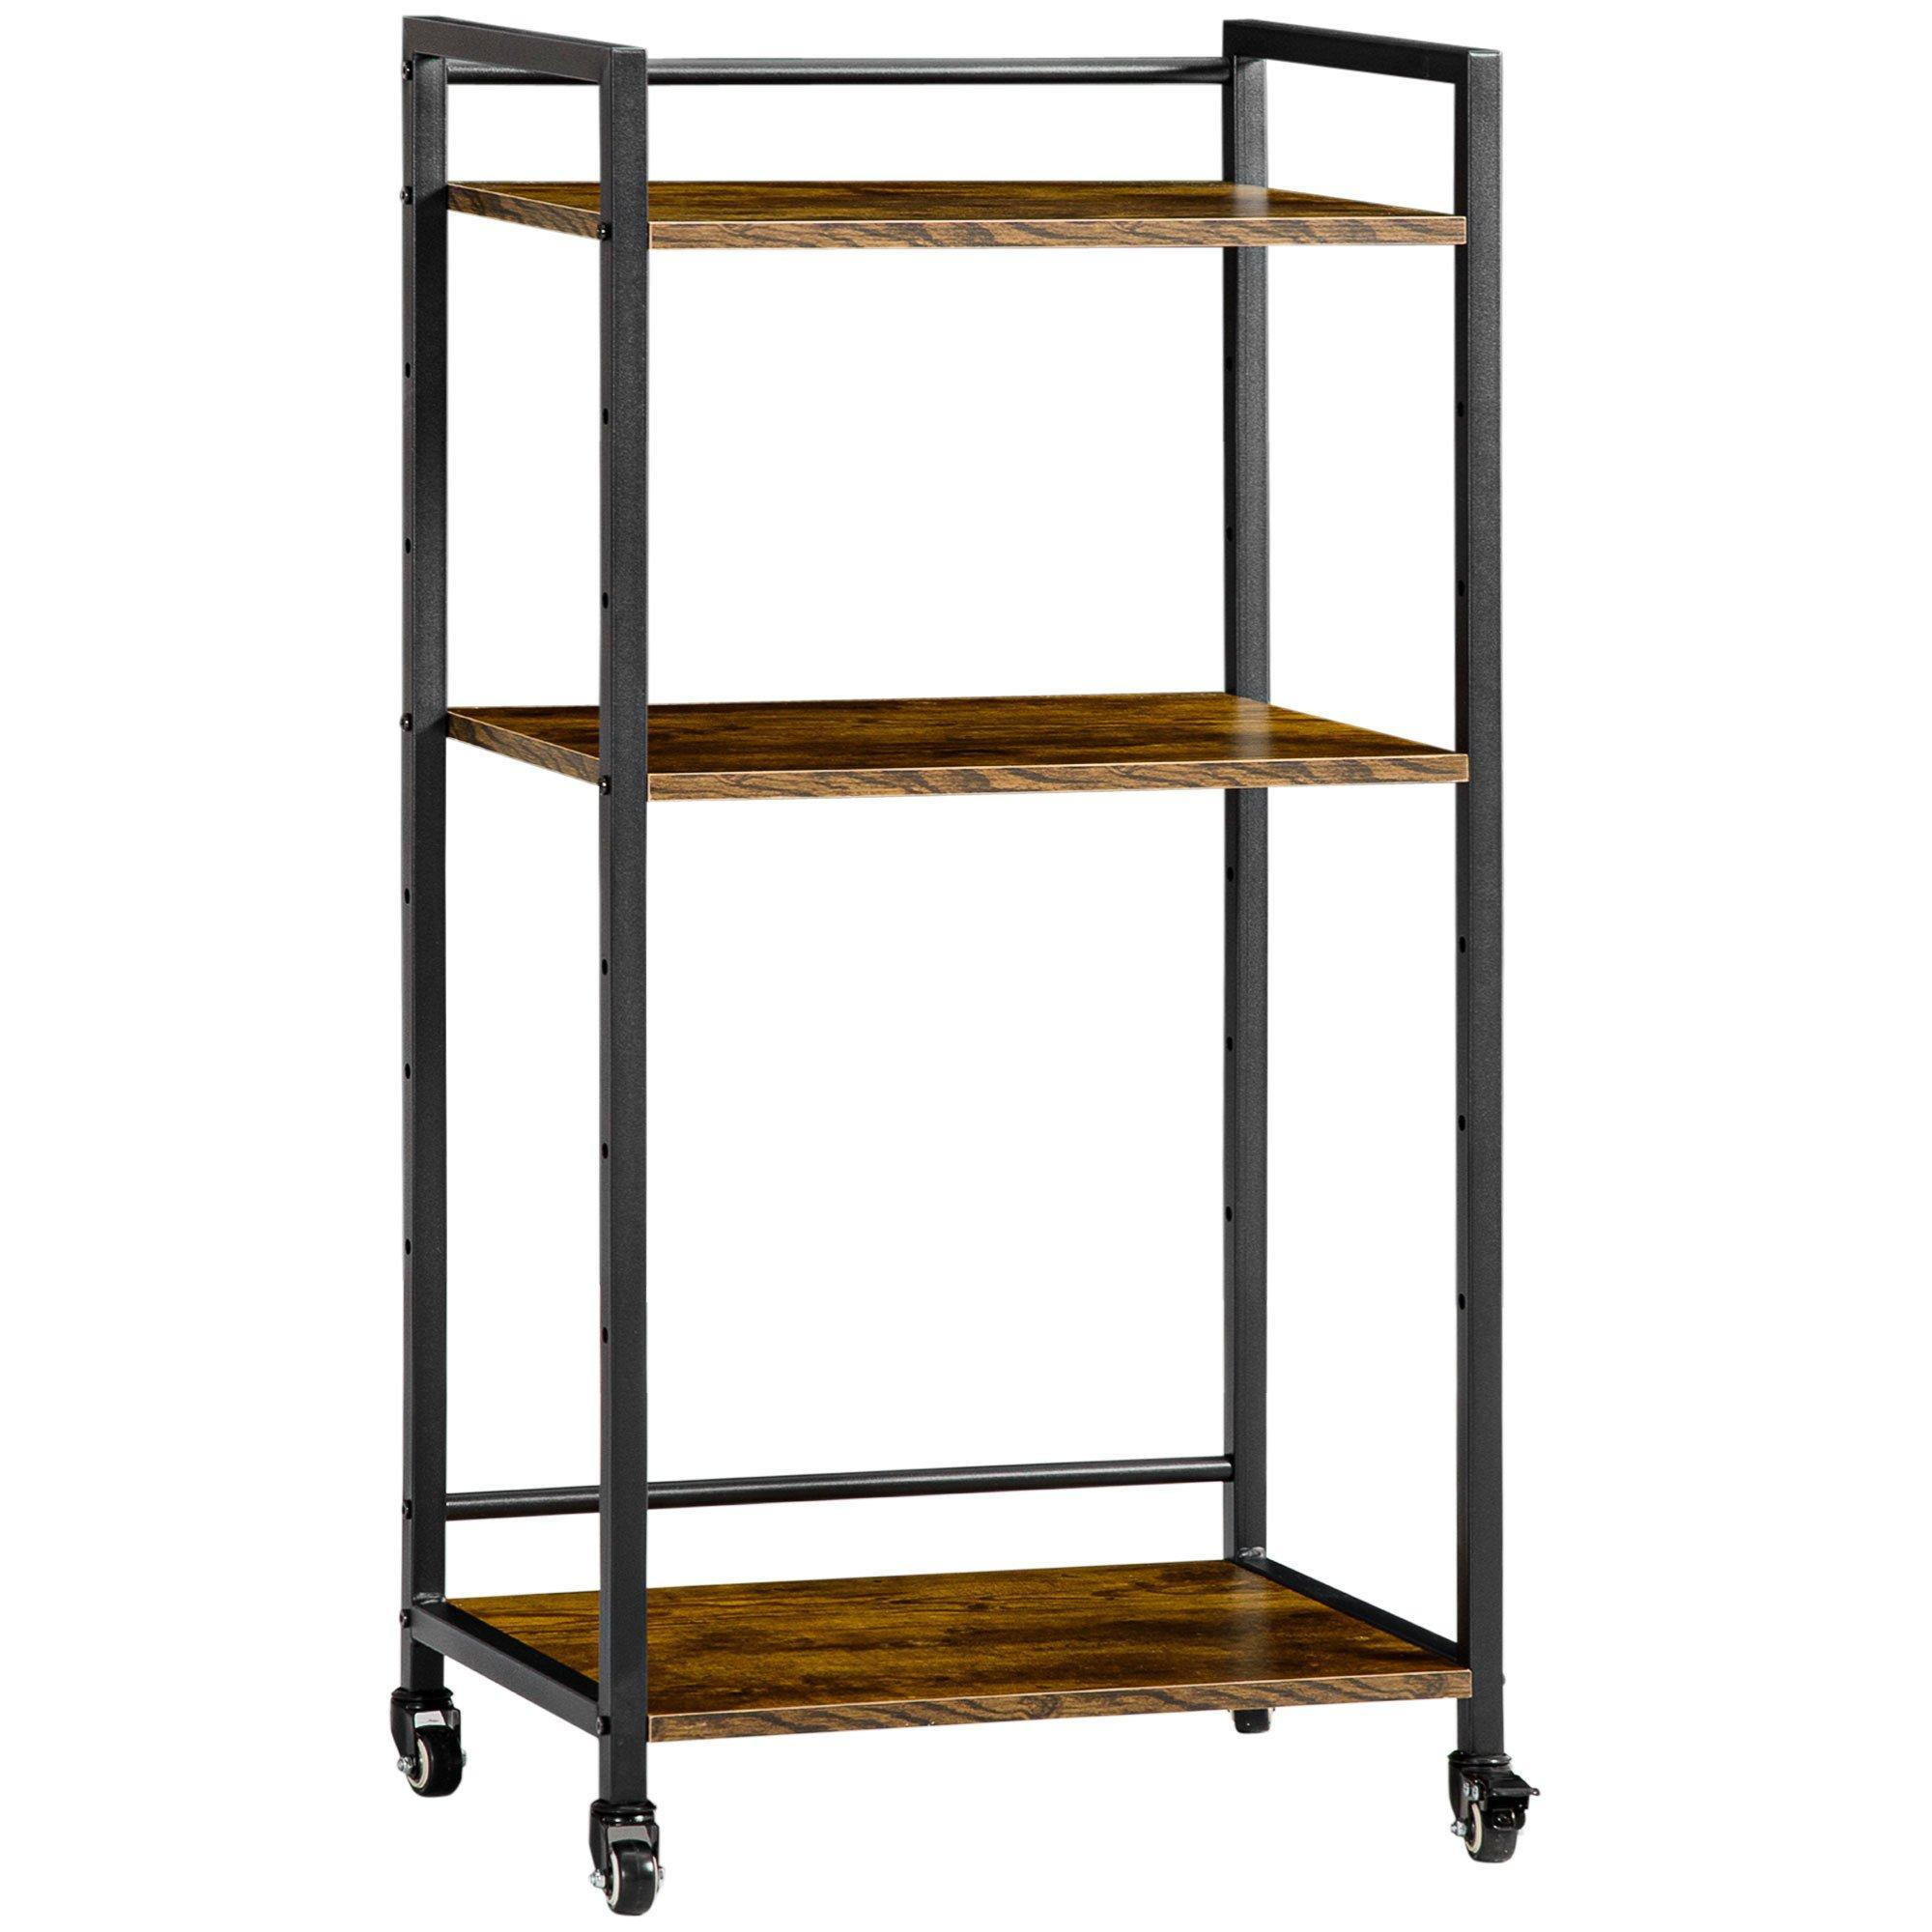 3-Tier Printer Stand Rolling Trolley with Adjustable Shelves - image 1